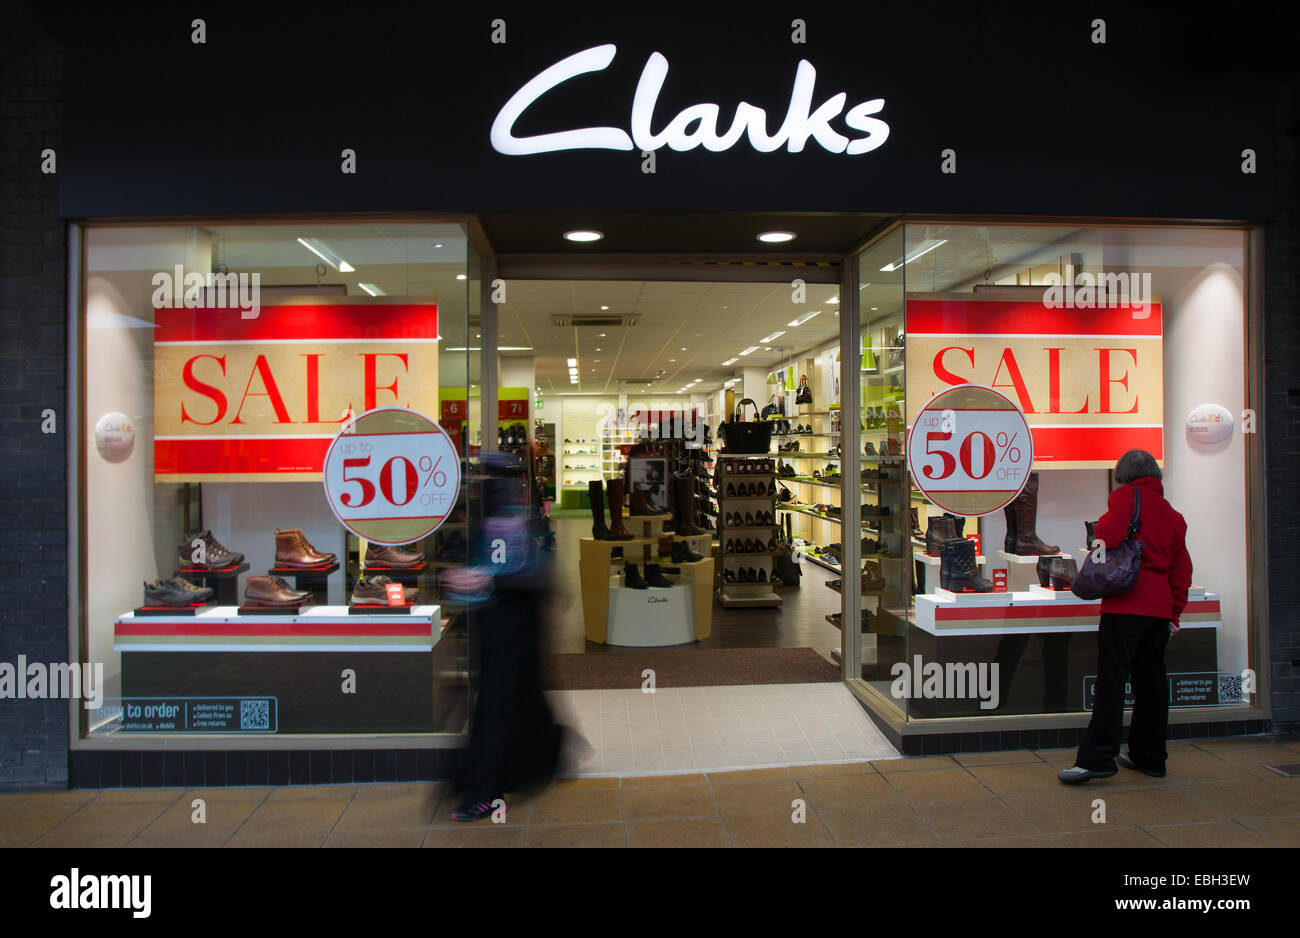 clarks bostonian outlet locations